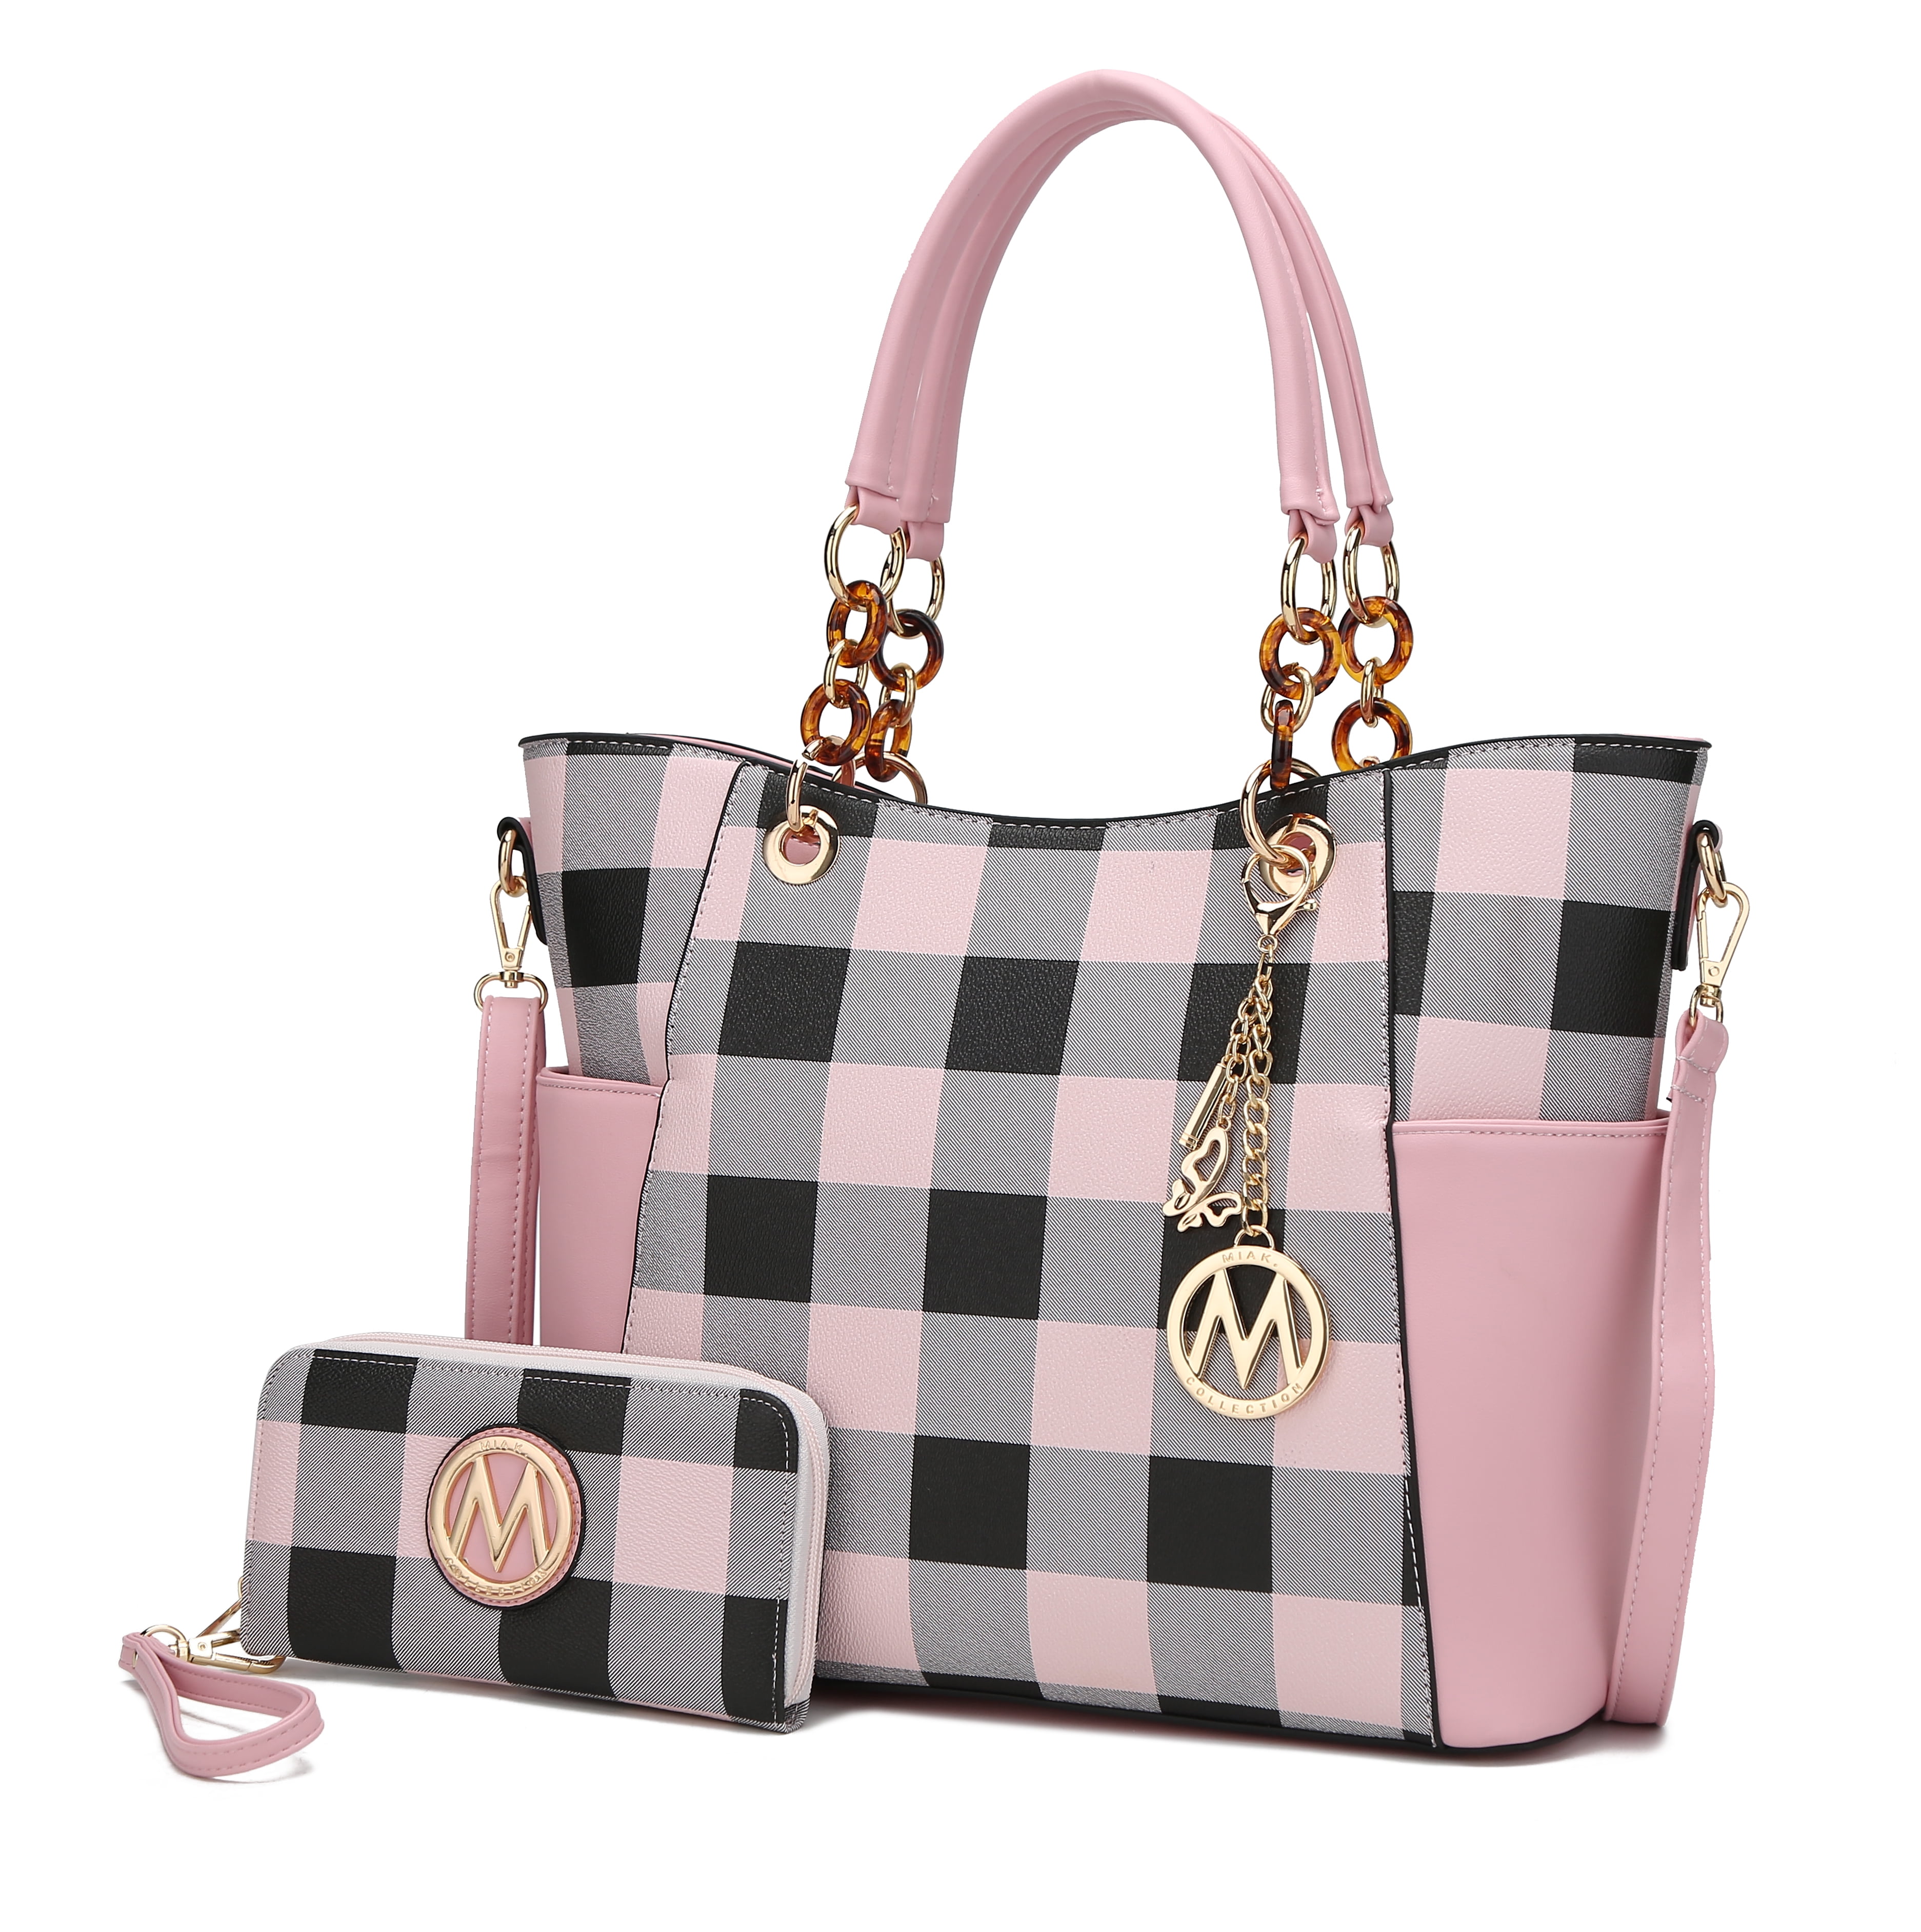 Brand New Women/'s Inspired Check Pattern Shopper Bag Set Of Two Bags Check Bag